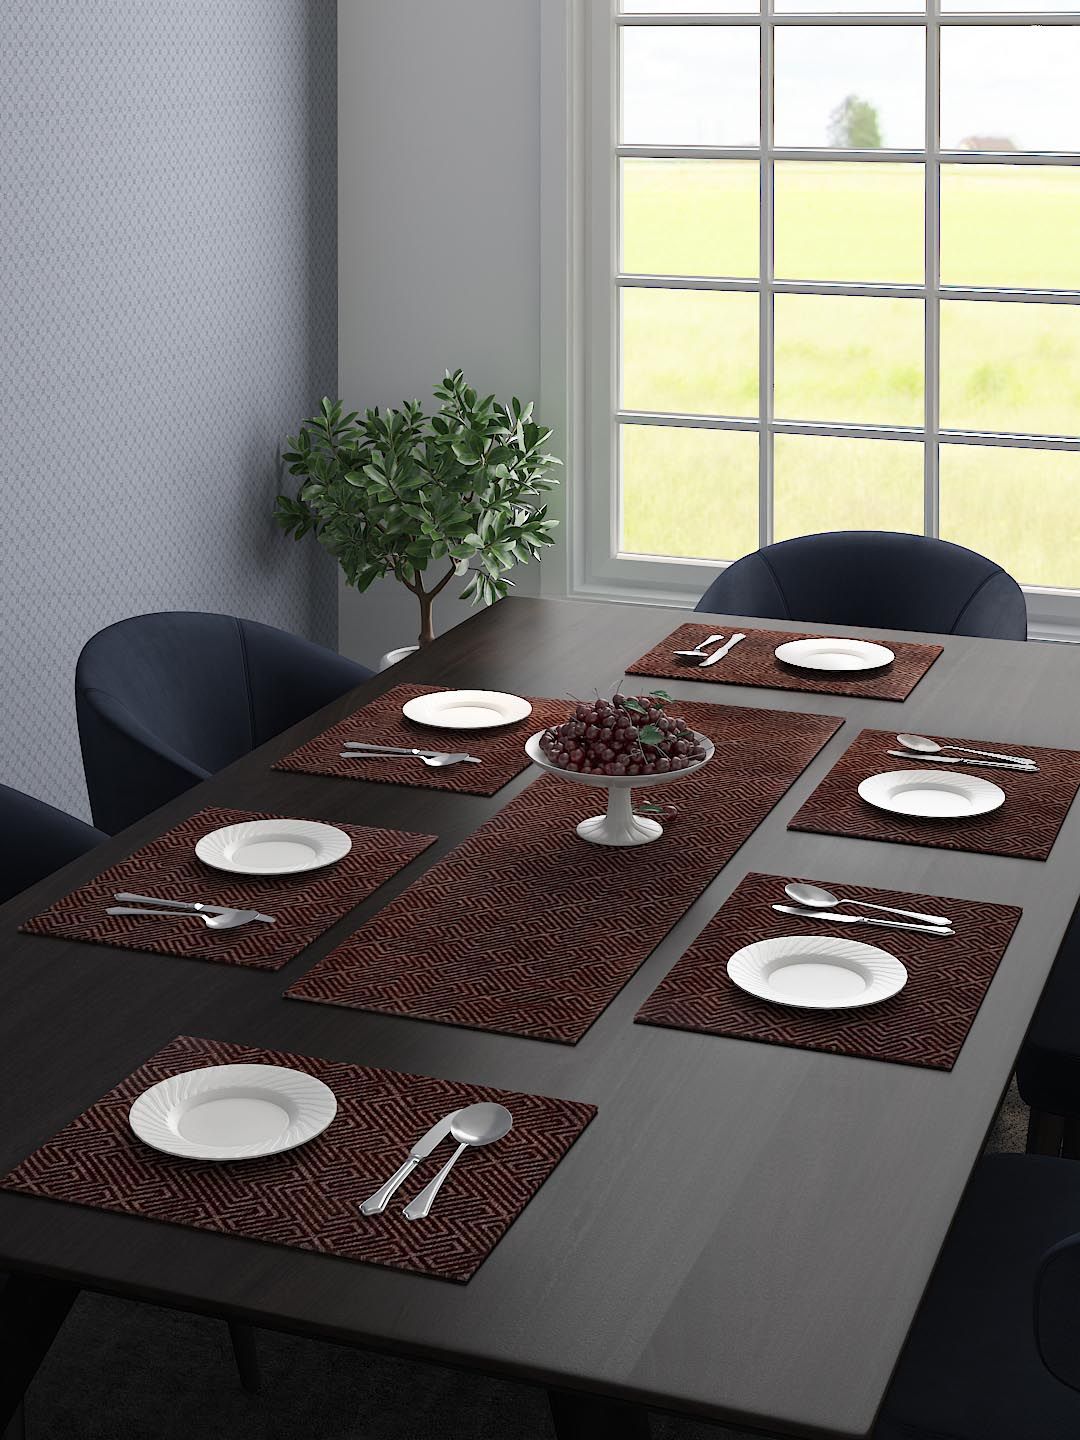 Saral Home Set Of 6 Brown Printed Table Placemats Price in India